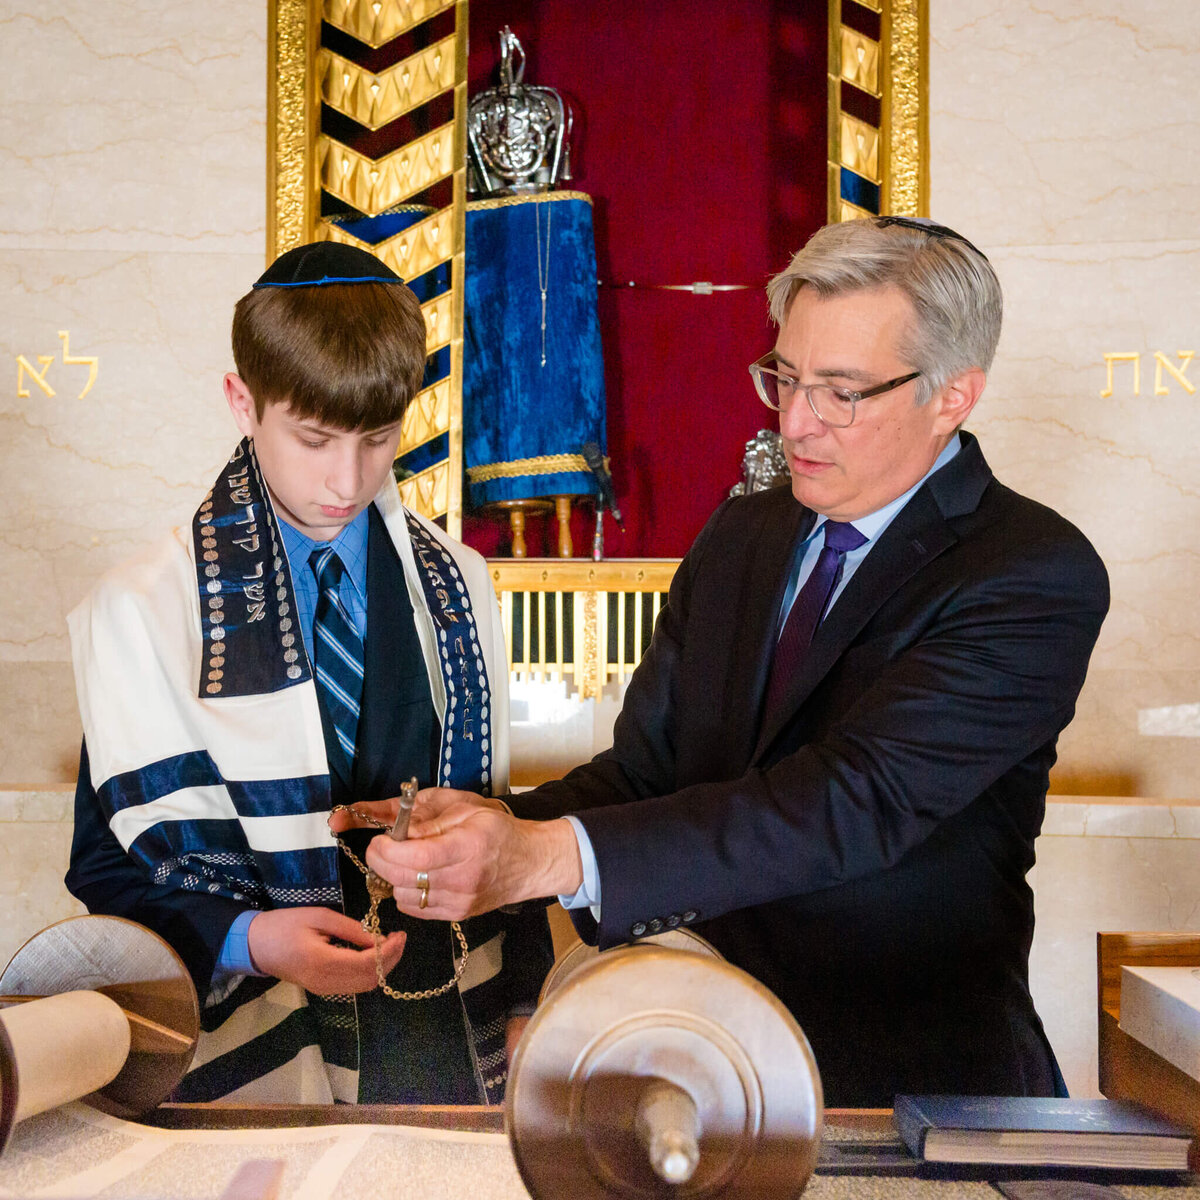 A rabbi helps a boy in a blue suit and tallit at the bimah